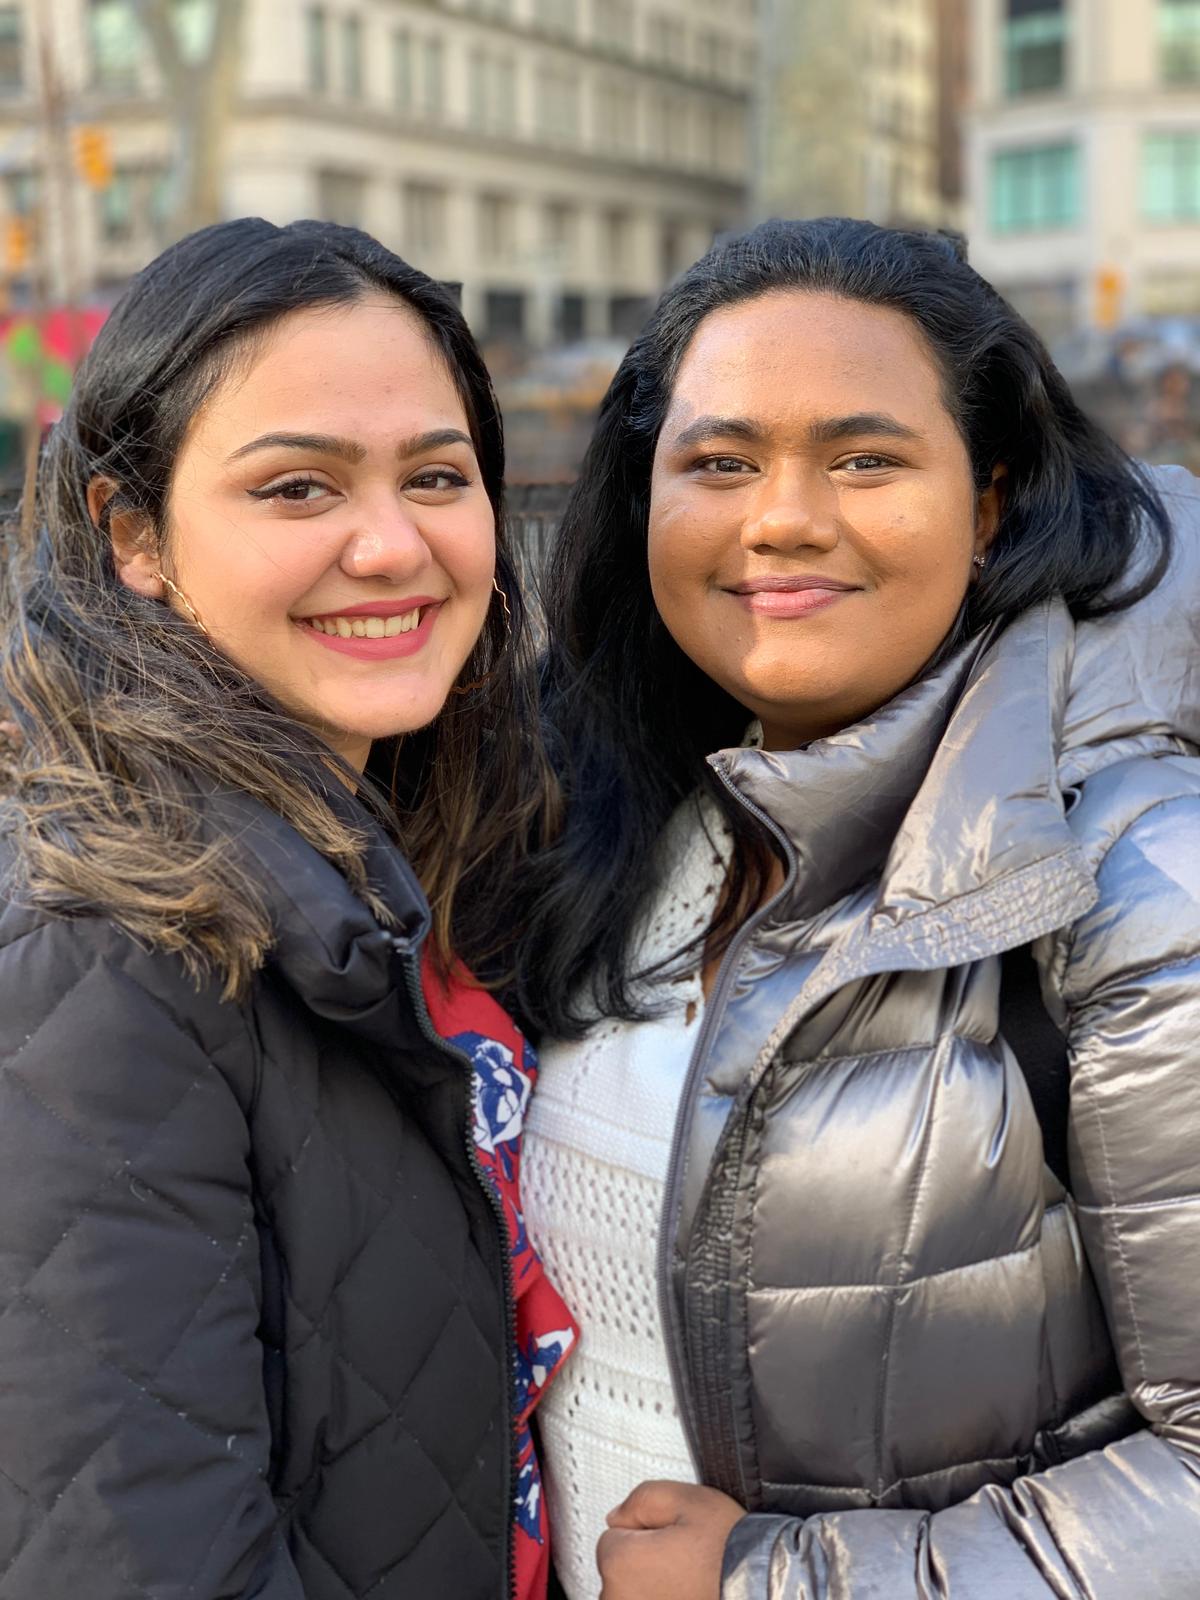 Vasha Ahmed (L) in New York on March 22, 2019. (Stuart Liess / The Epoch Times)